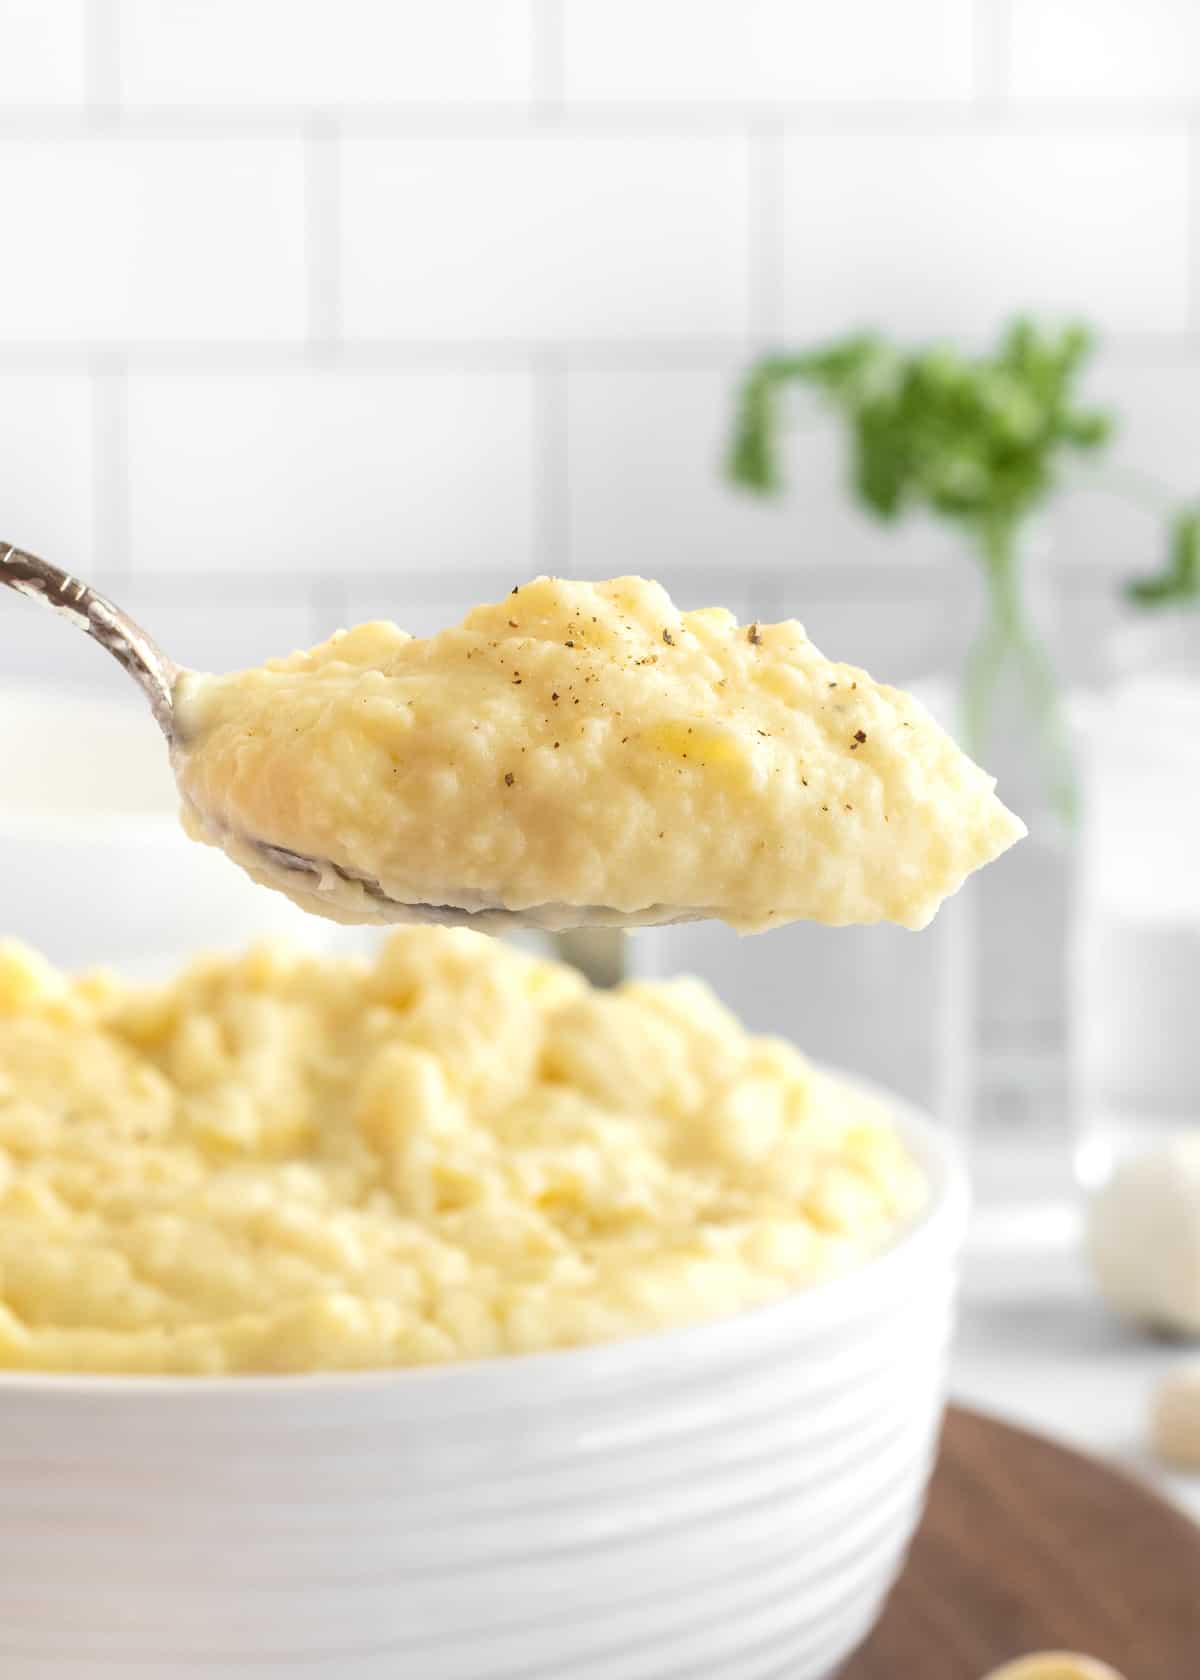 Creamy Mashed Potatoes by The BakerMama